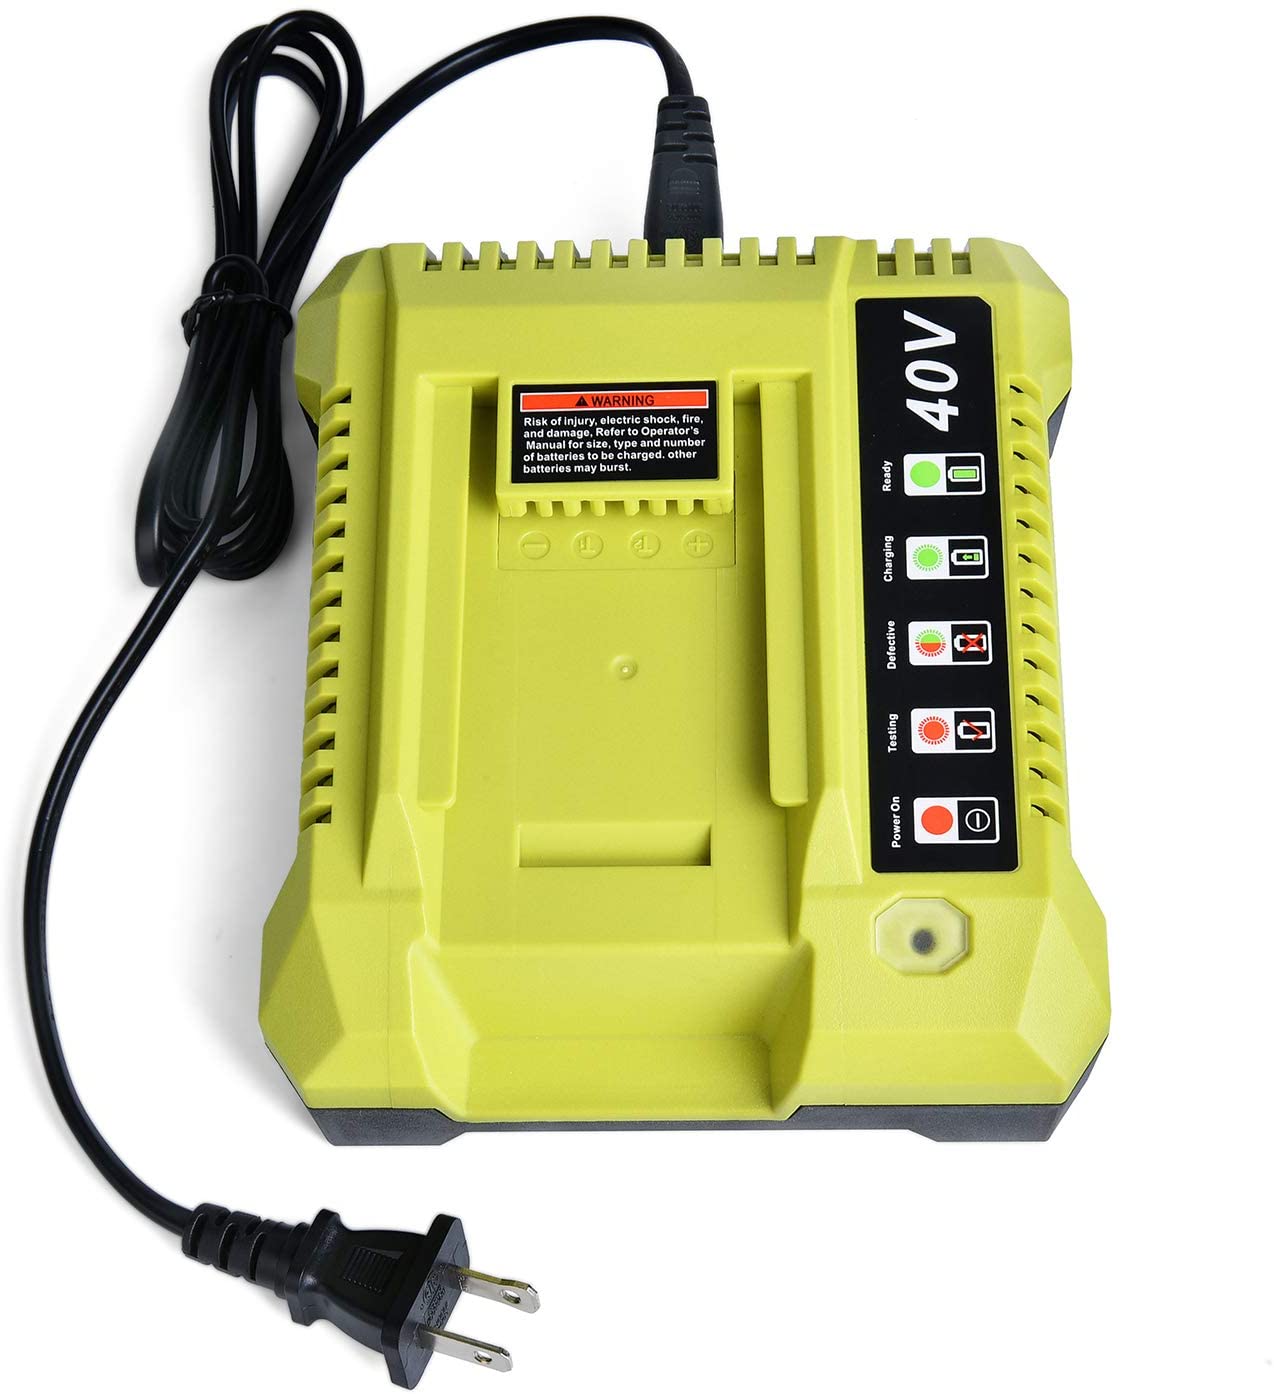 How Long Does It Take To Charge A Ryobi 40V Battery